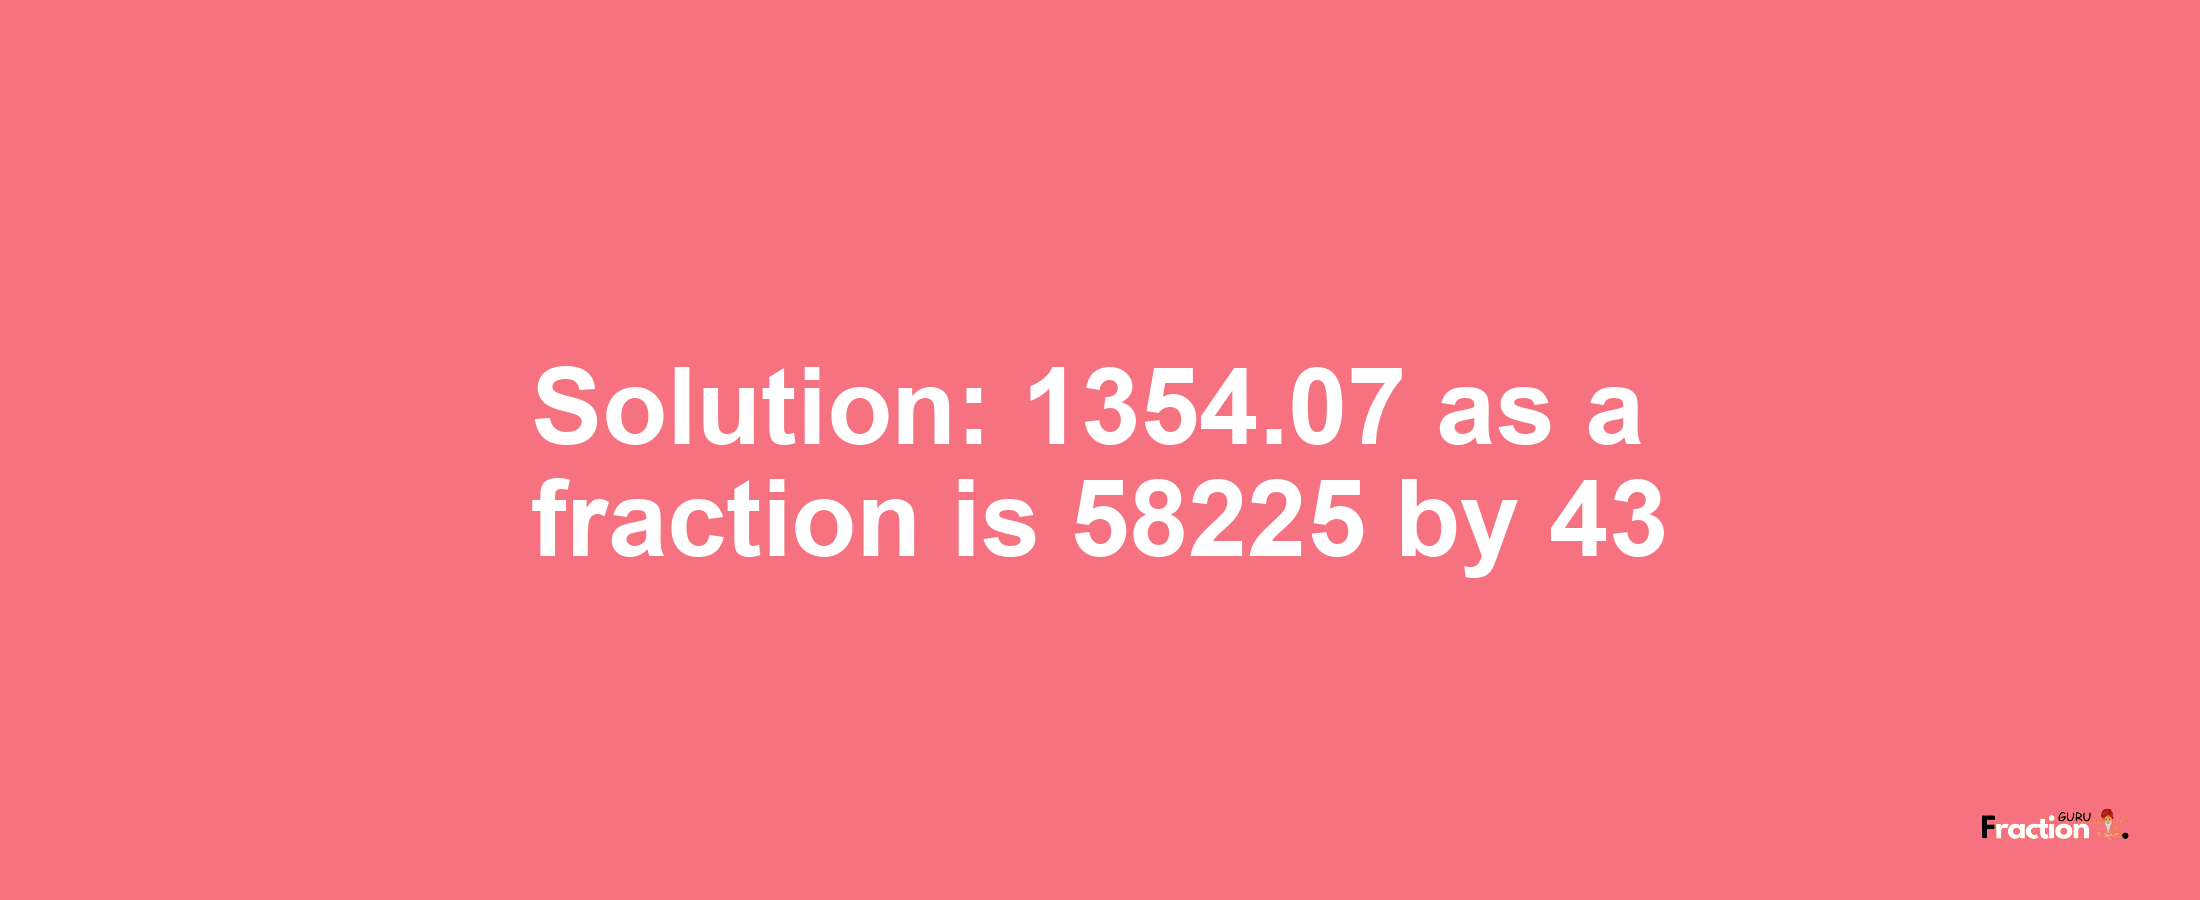 Solution:1354.07 as a fraction is 58225/43